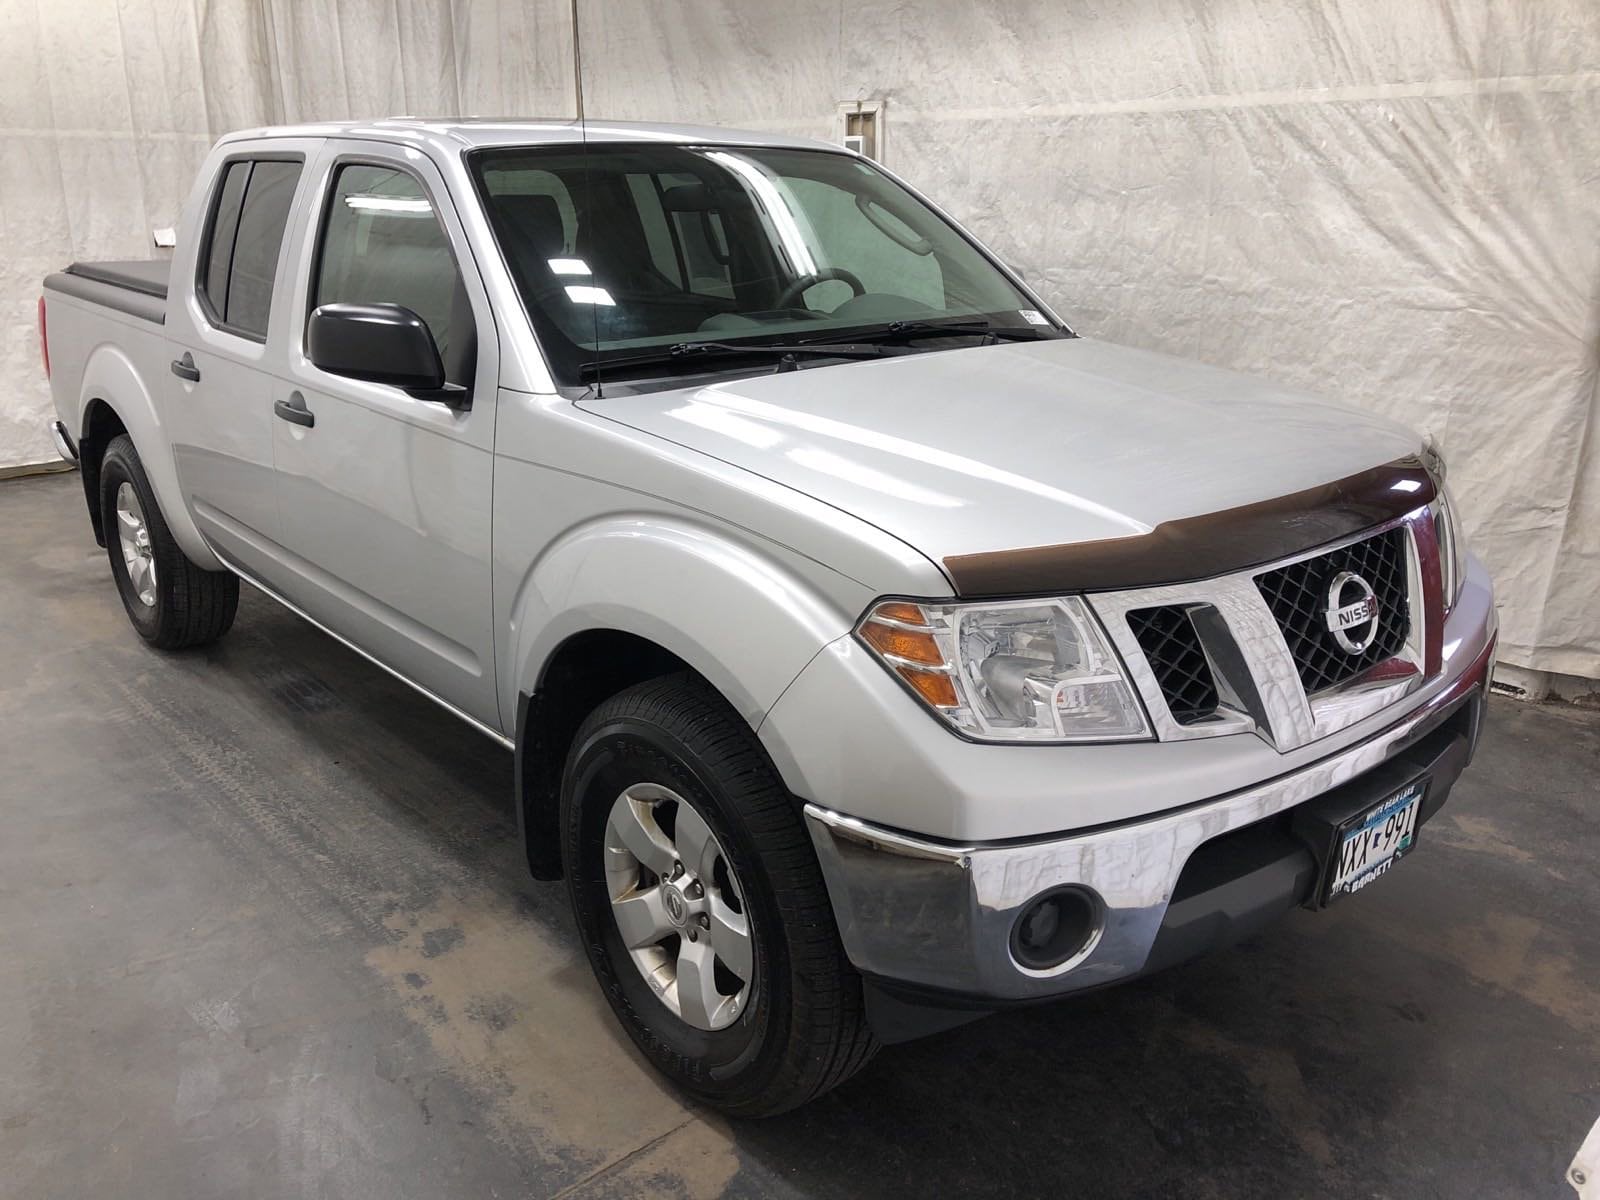 Used 2010 Nissan Frontier SE with VIN 1N6AD0EV3AC419406 for sale in White Bear Lake, Minnesota